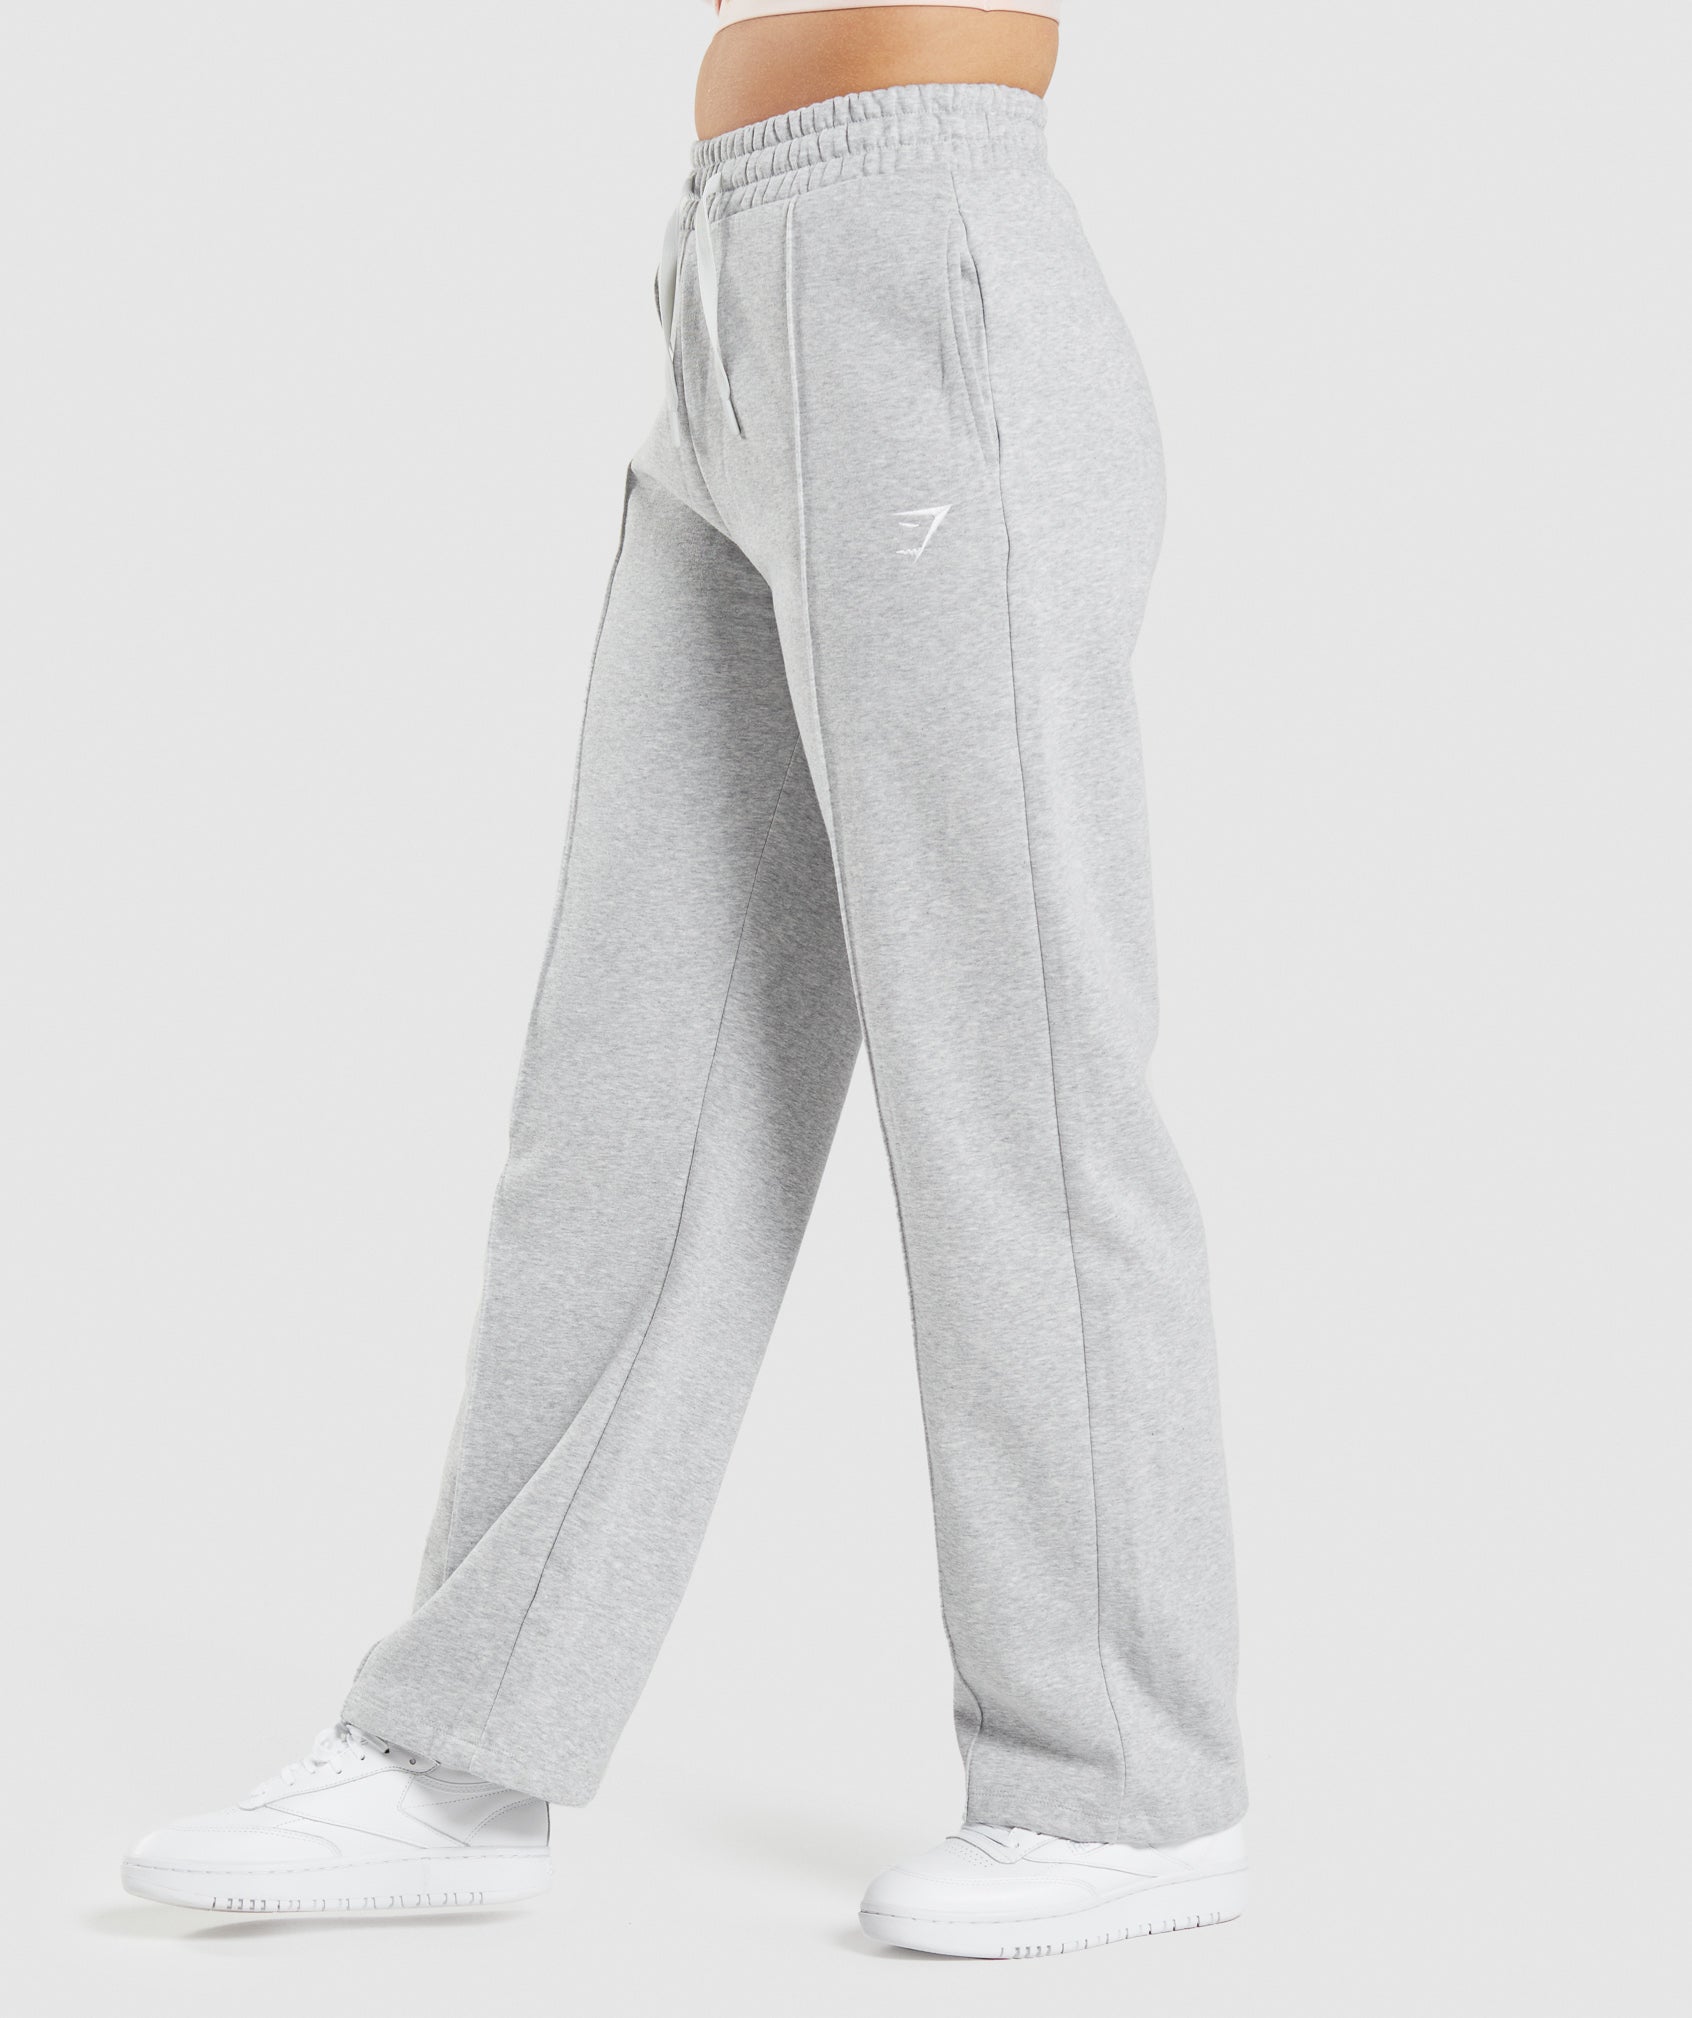 GYMSHARK Womens Joggers Gray Logo Sweatpants Ankle Zip Spell Out